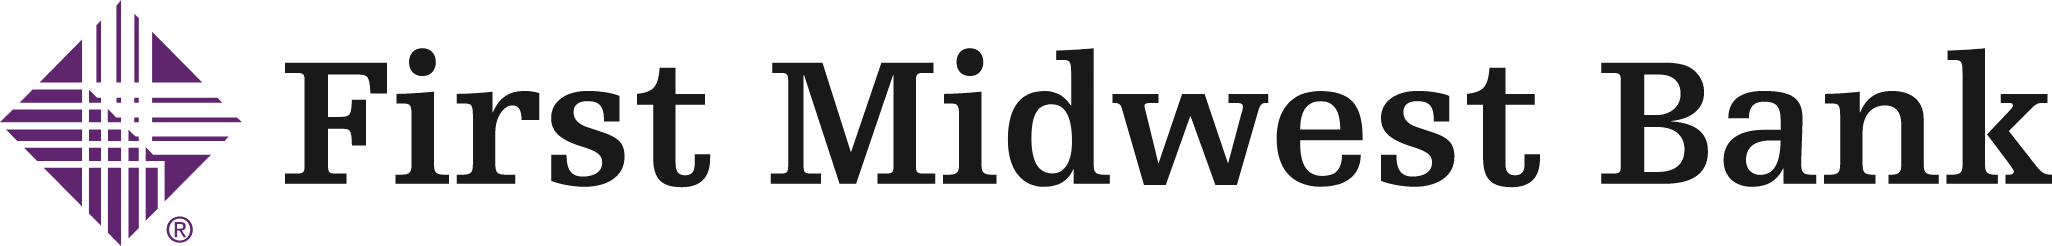 First Midwest Bancorp
 logo large (transparent PNG)